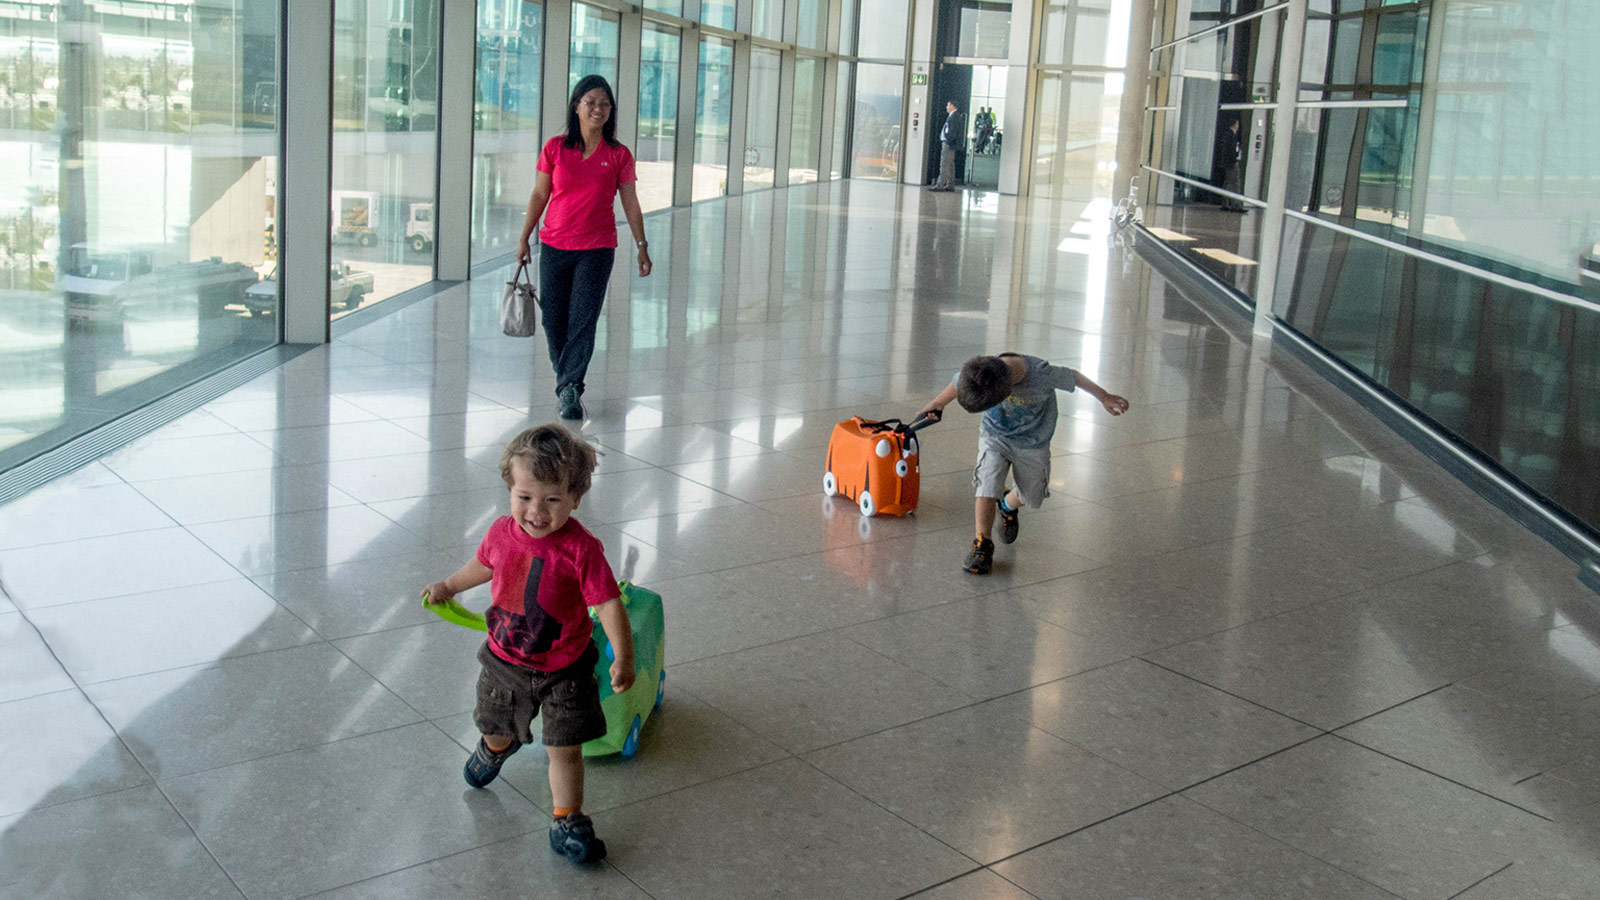 A woman and two young boys run through an airport